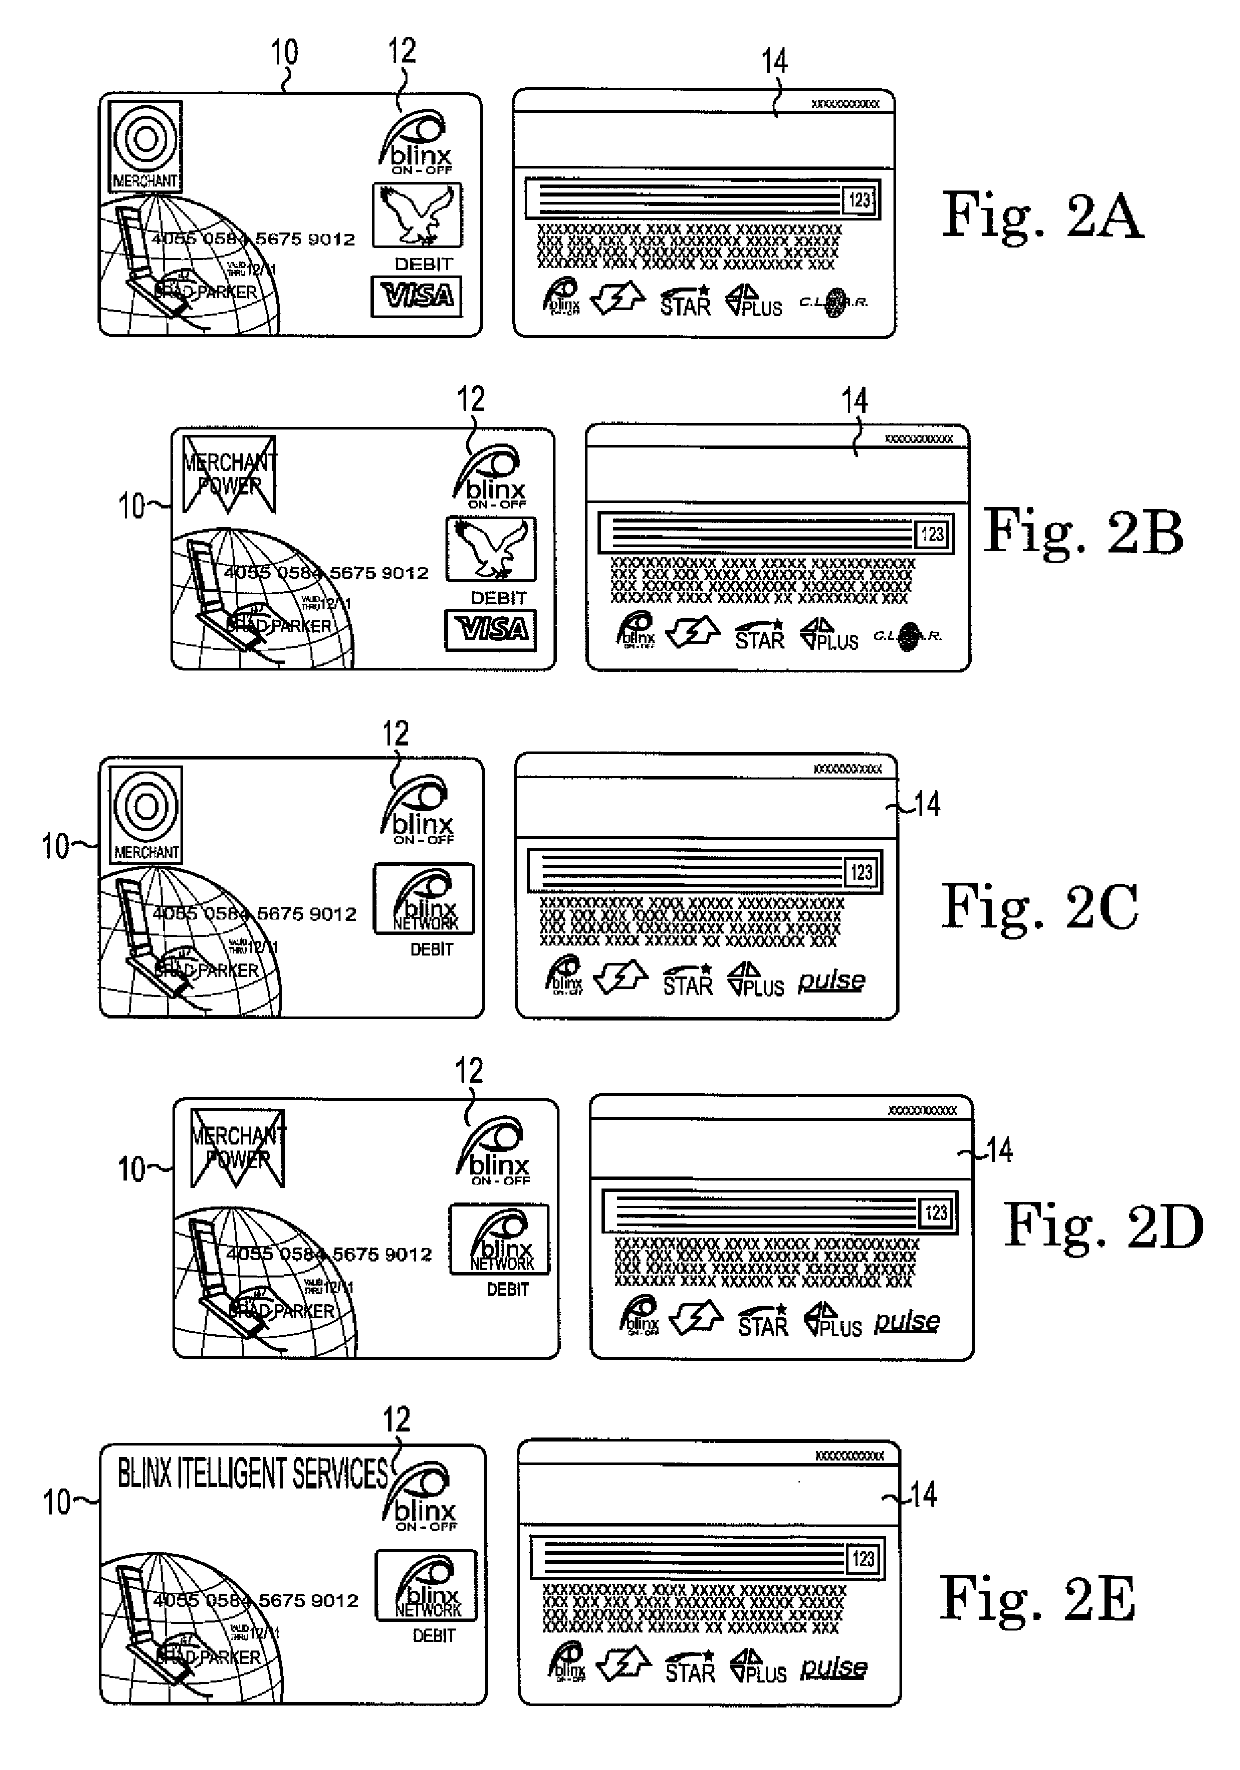 Financial card transaction security and processing methods